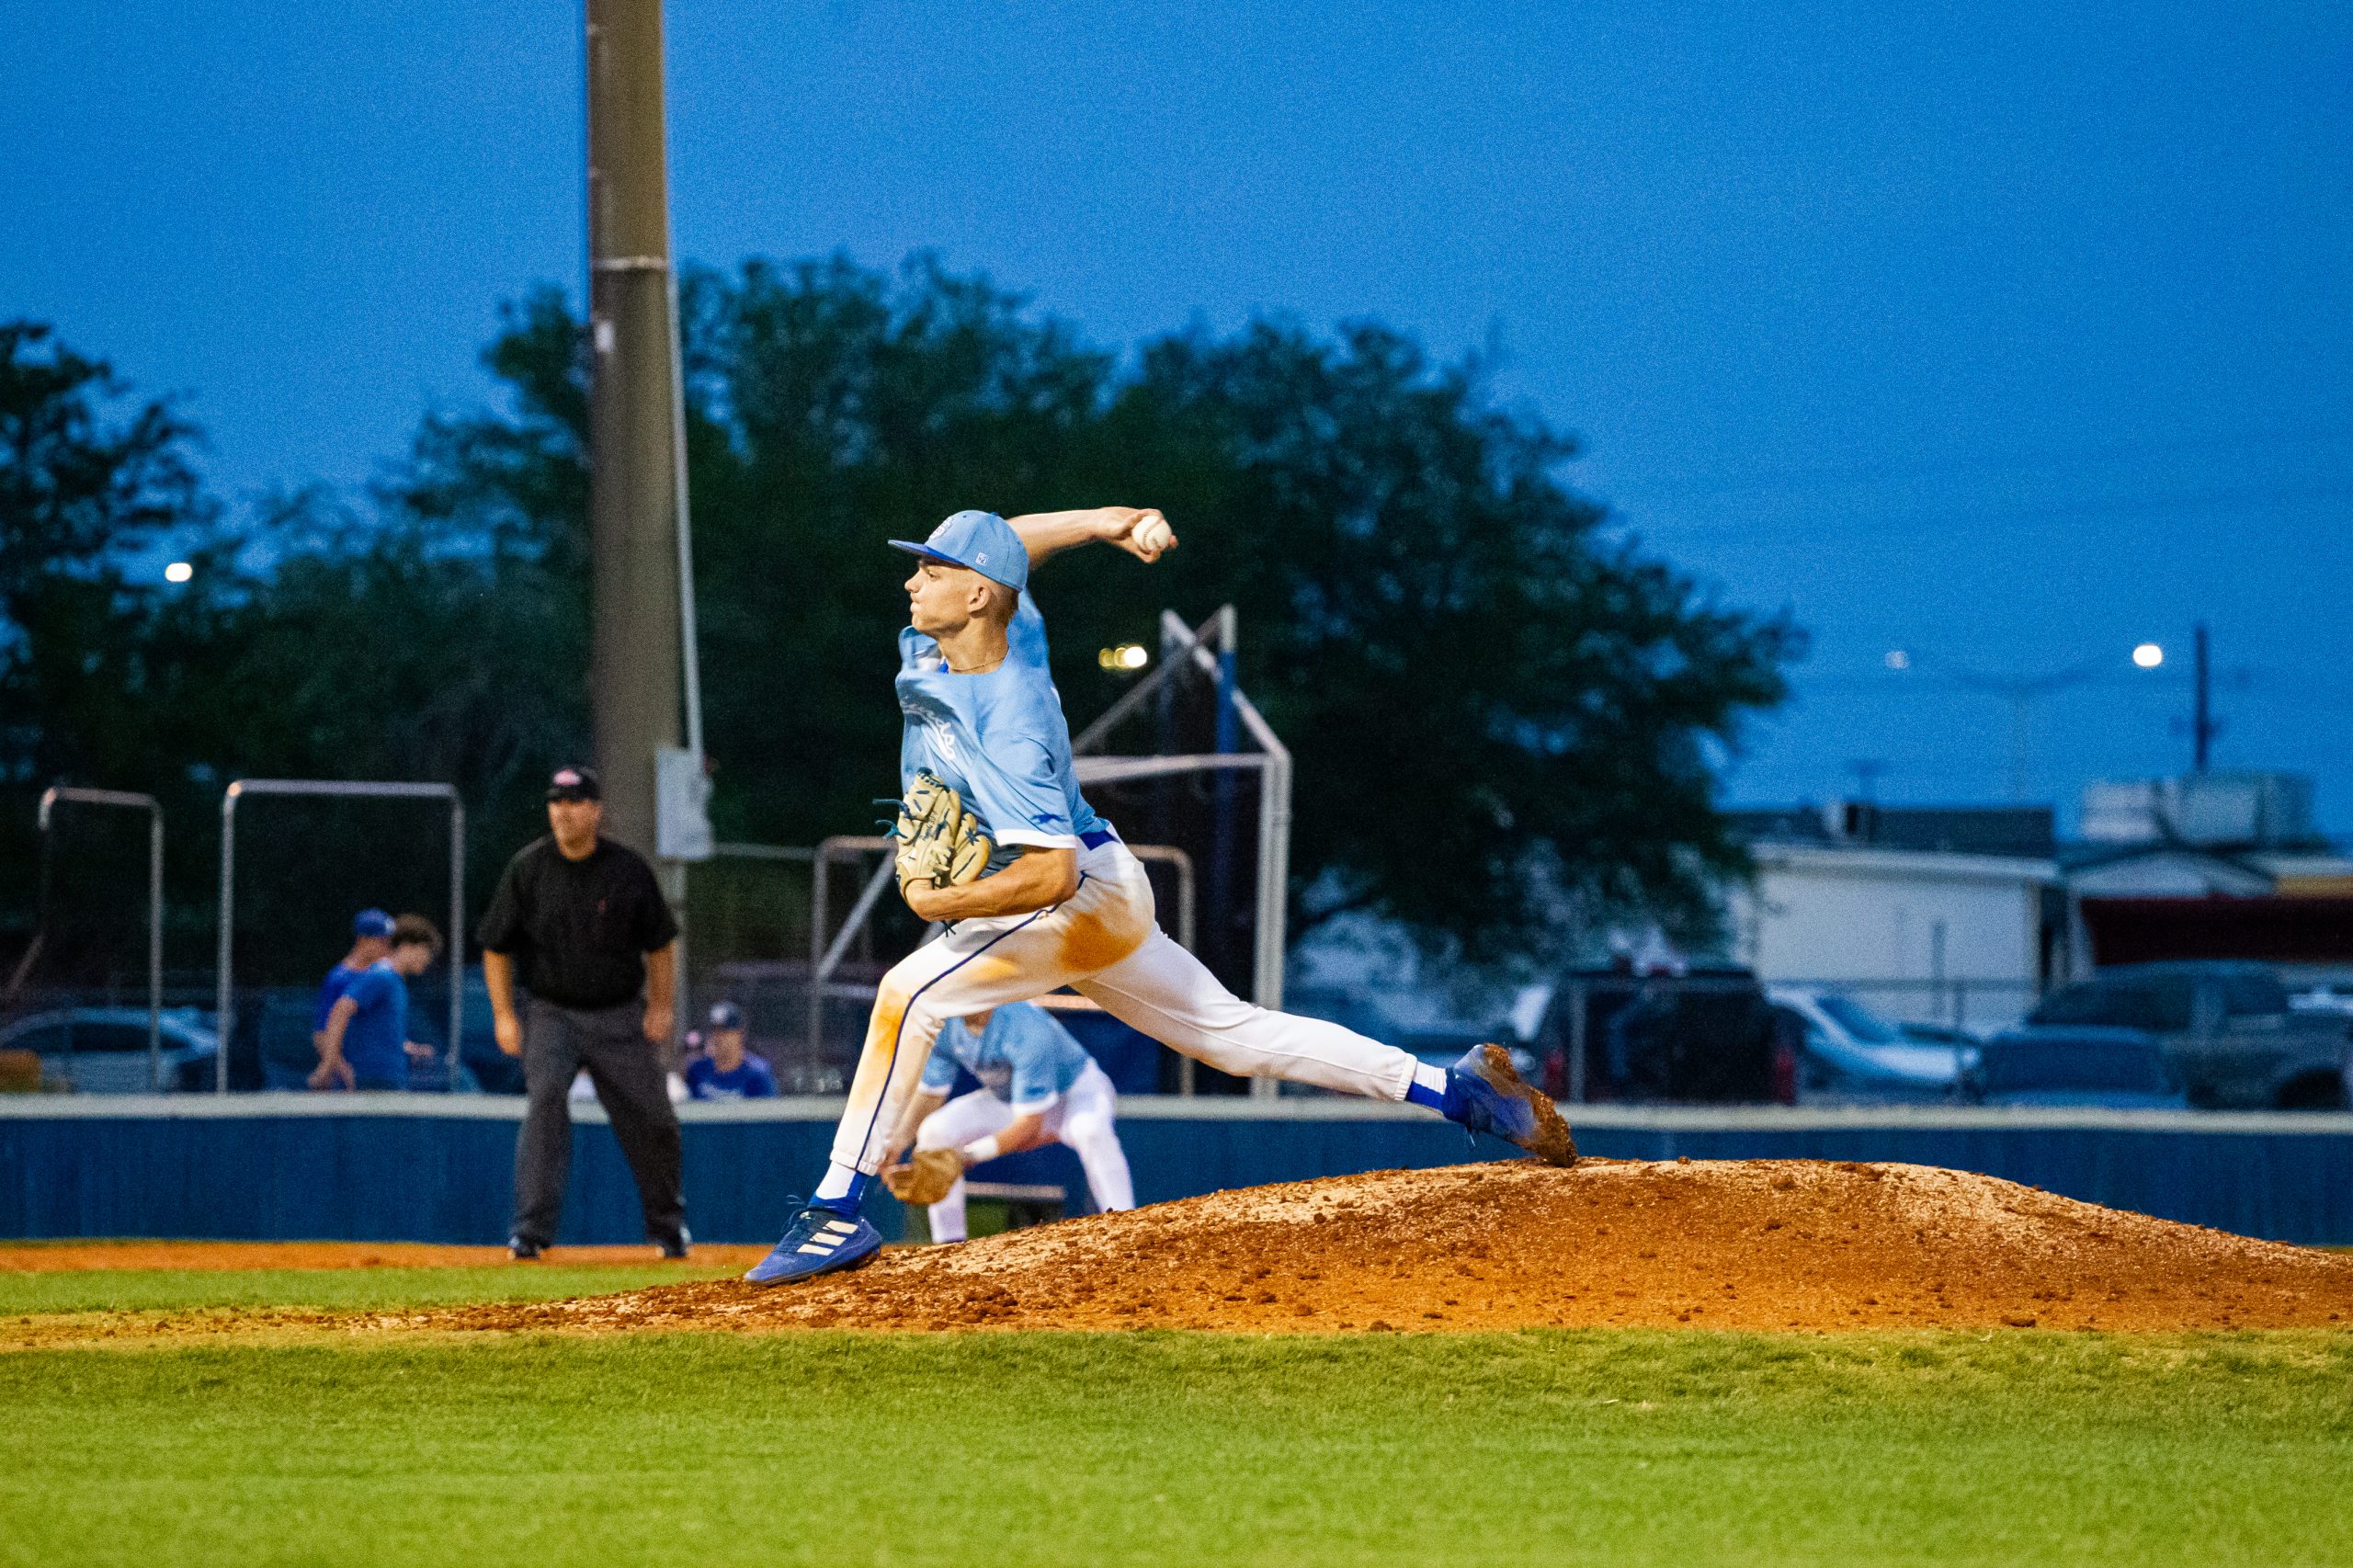 Prep Baseball Lee S No Hitter Guides Gulfport Past St Martin While Oshs Pops Hchs In Class 6a